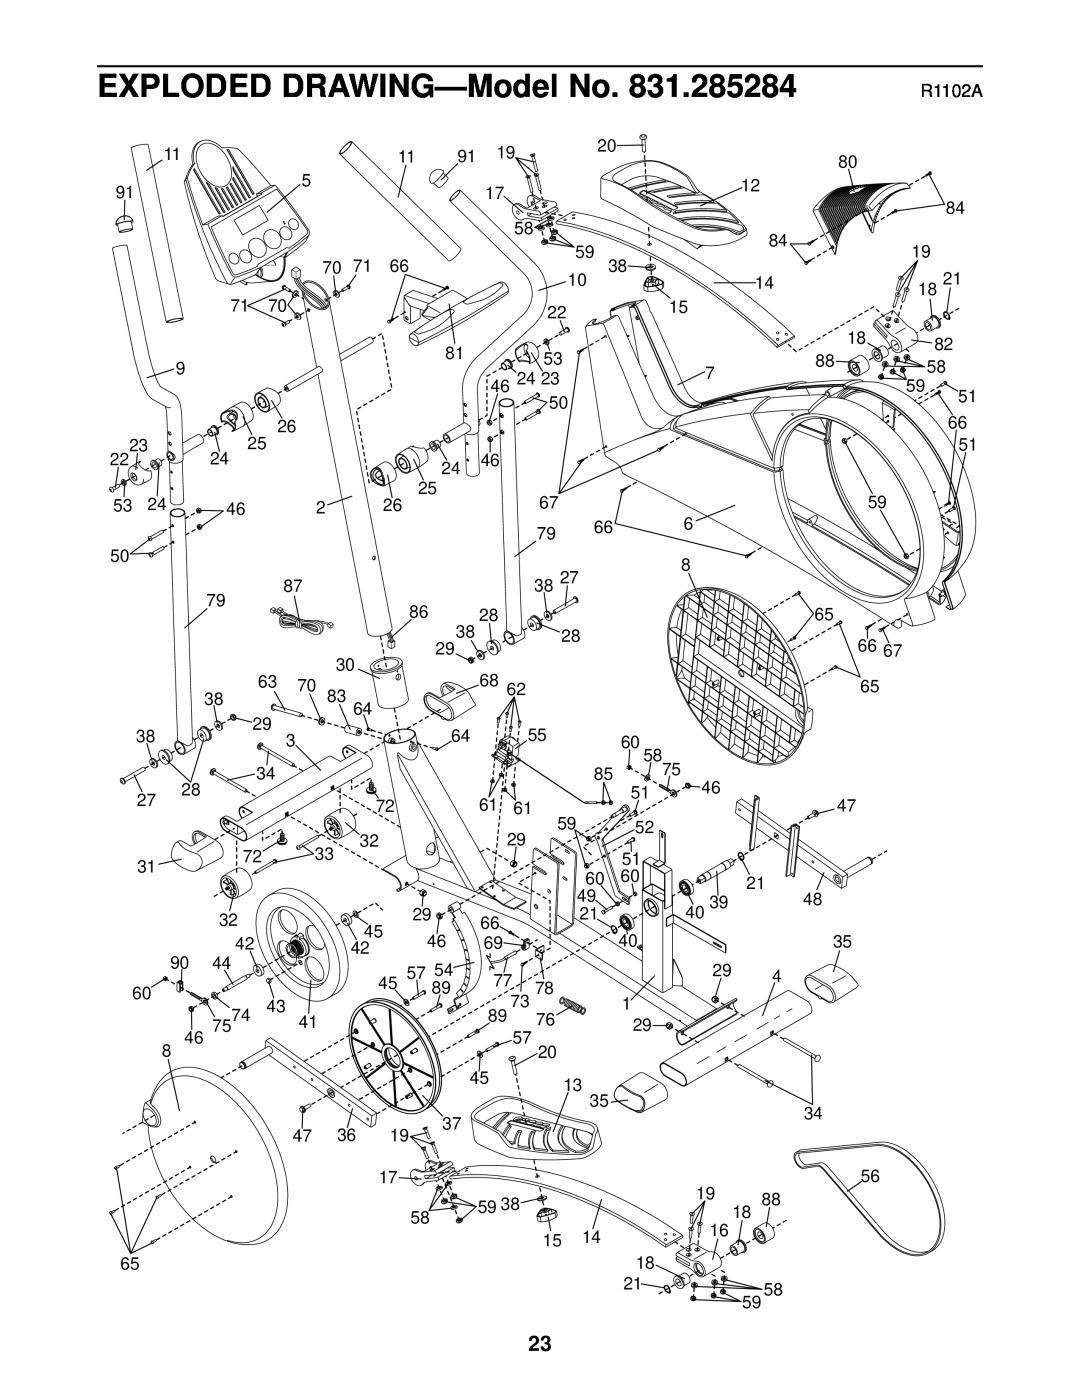 ProForm 831.285284 user manual EXPLODED DRAWING-Model No, R1102A 